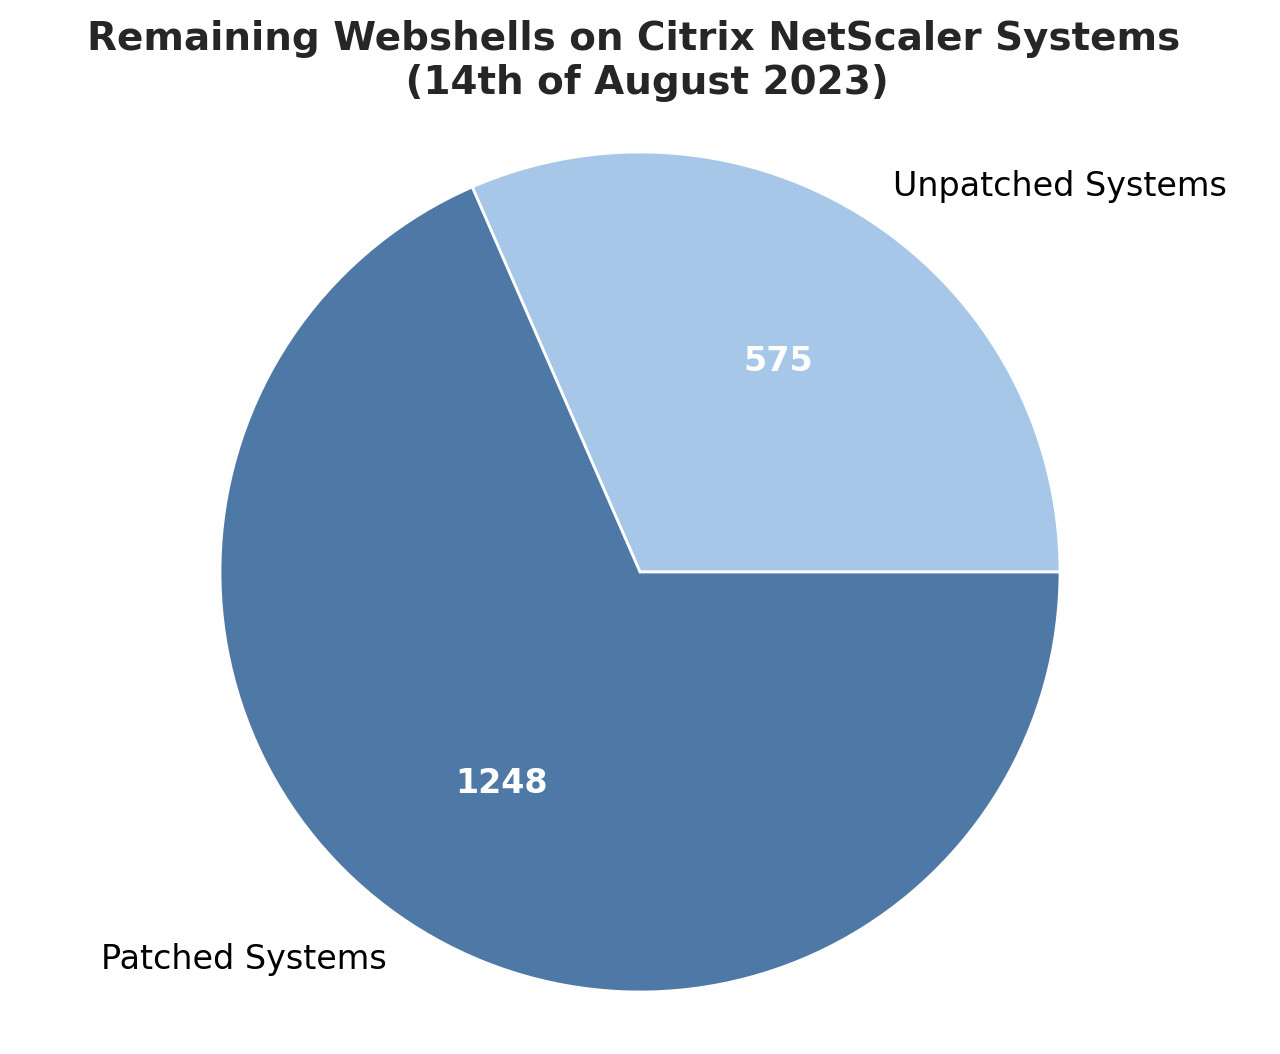 Web shells on Citrix NetScaler servers - patched and unpatched for CVE-2023-3519